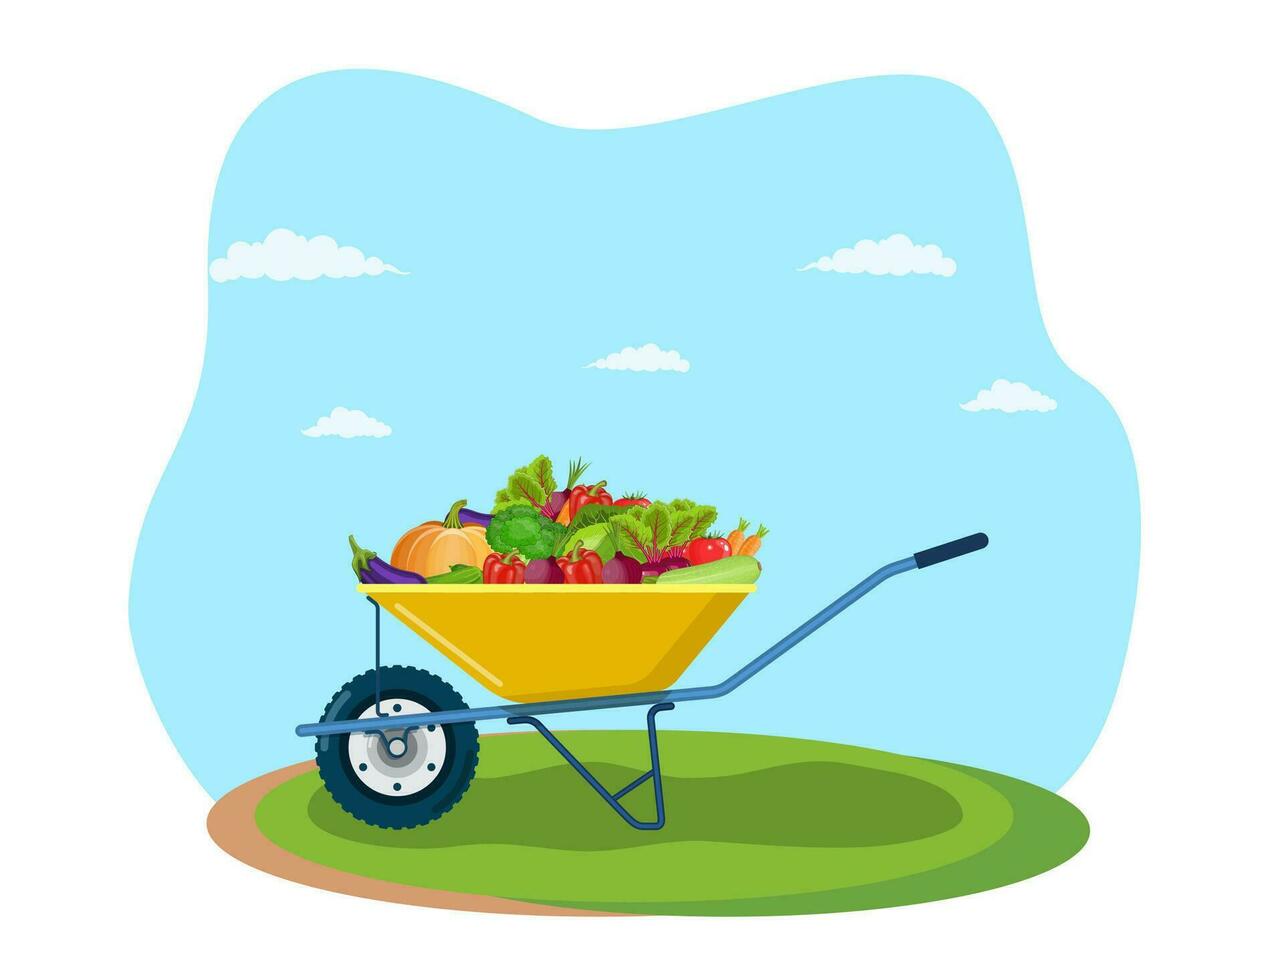 Garden cart with eggplant, tomato, beetroot, zucchini, pepper, cucumber, carrot. Organic farm products. Metal wheelbarrow full of ripe vegetables. Vector illustration in flat style